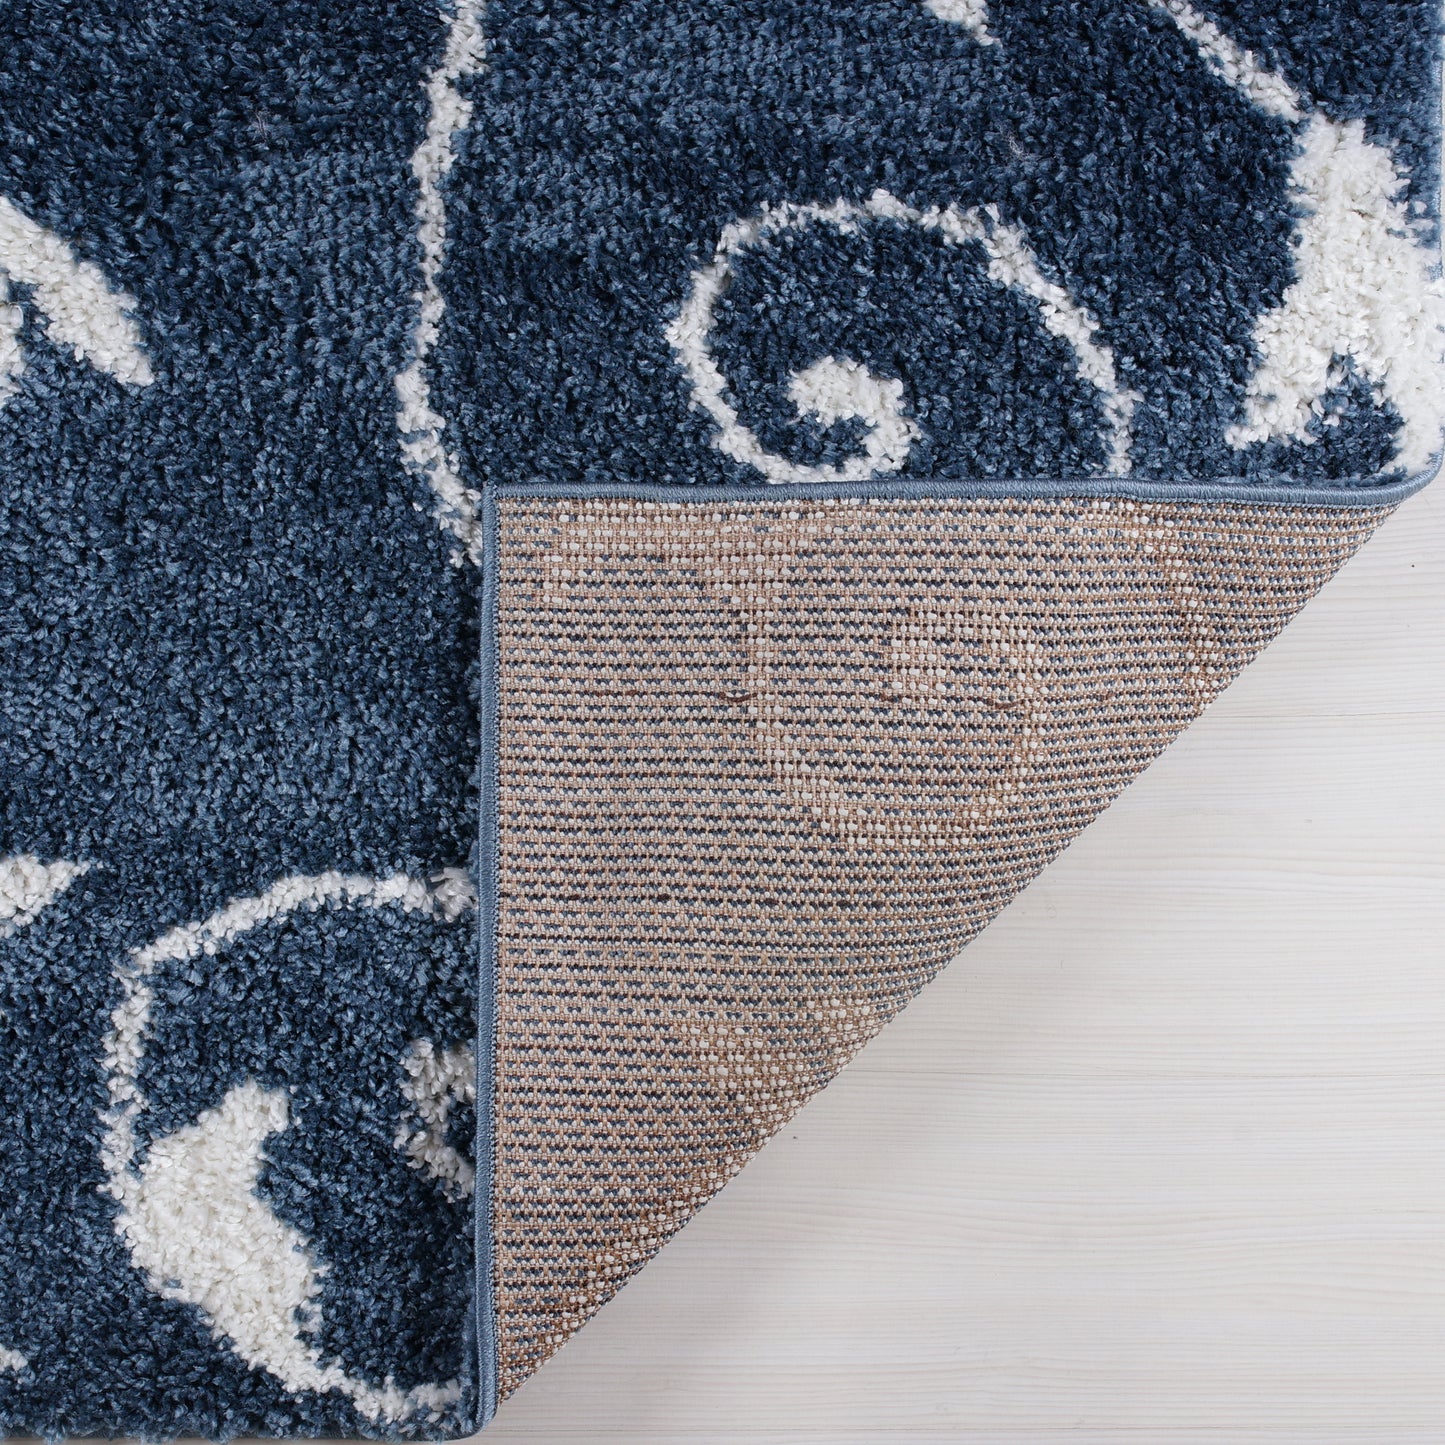 ladole rugs shaggy rabat abstract pattern sustainable spirals style indoor small mat doormat rug in blue white 110 x 211 57cm x 90cm 5x7, 5x8 ft Contemporary, Living Room Carpet, Bedroom, Home Office